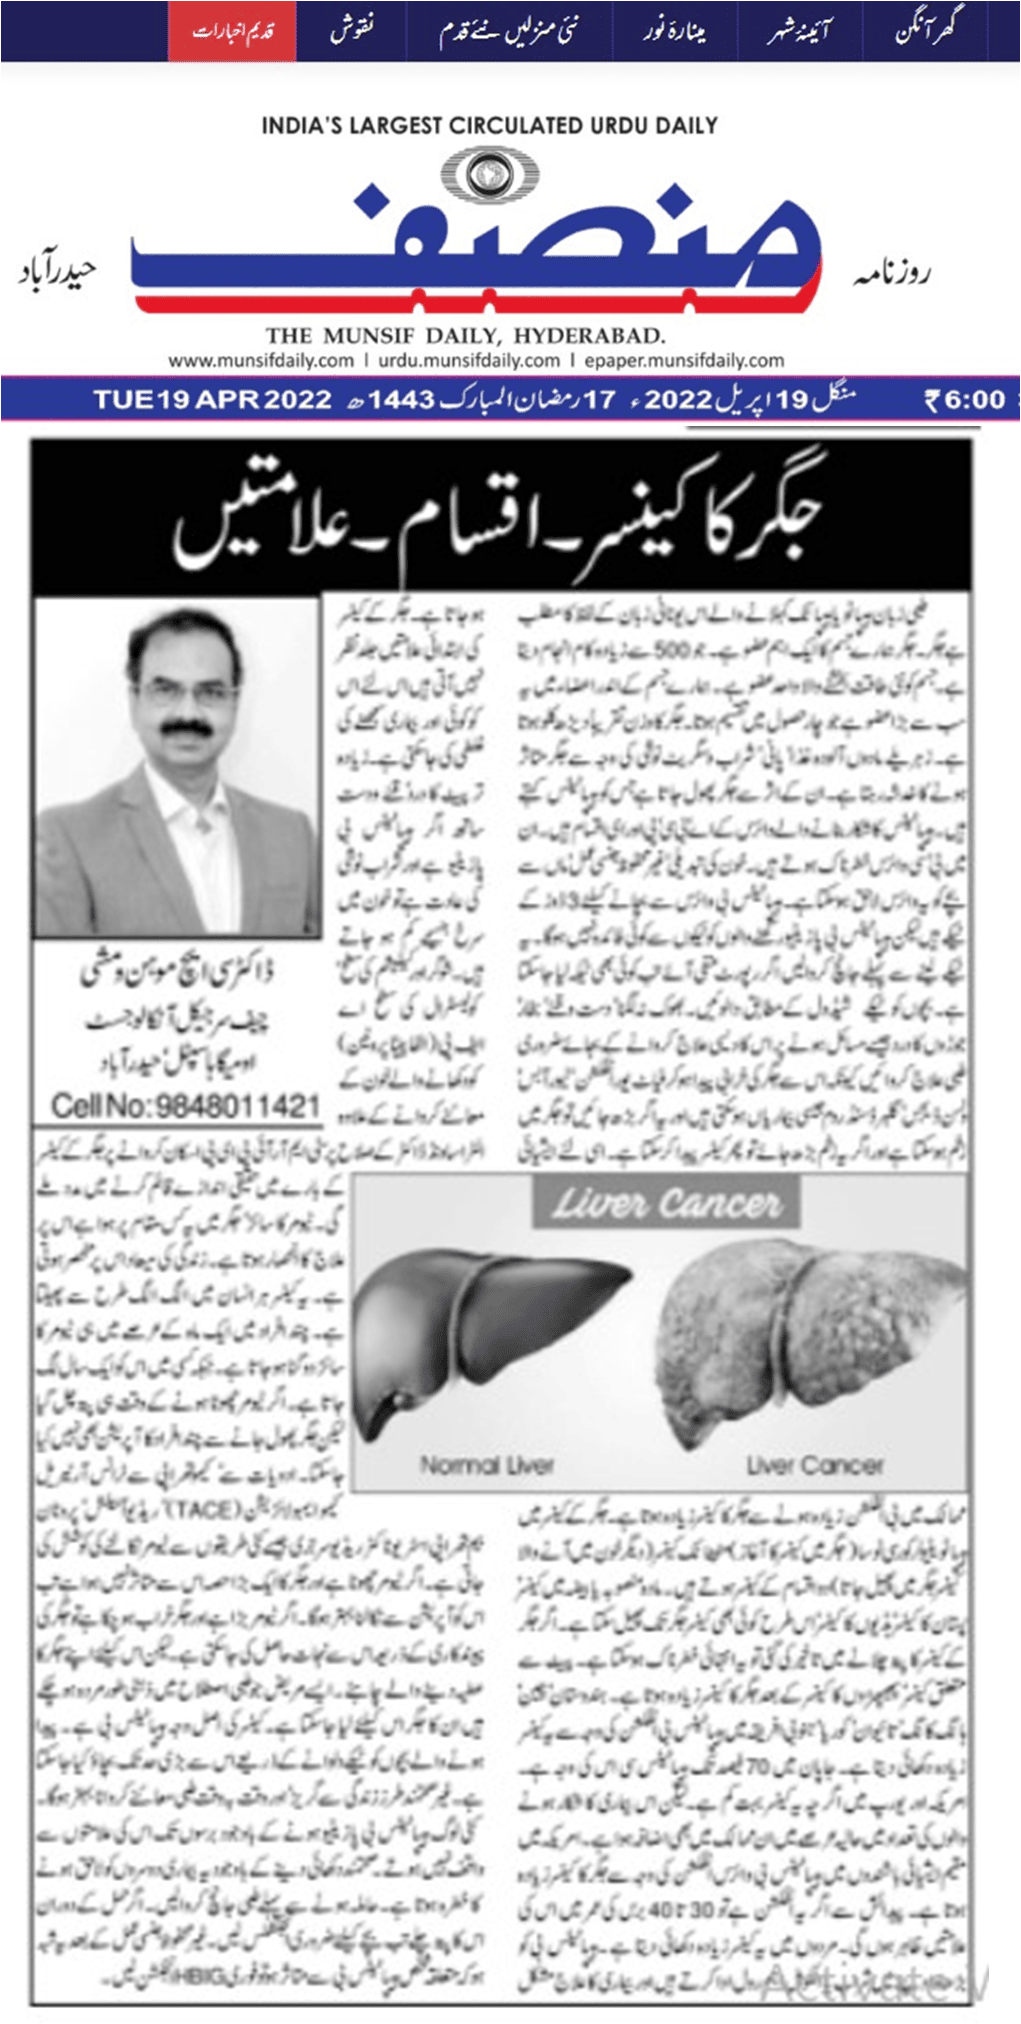 19-04-2022 Topic on Liver Cancer Munsif